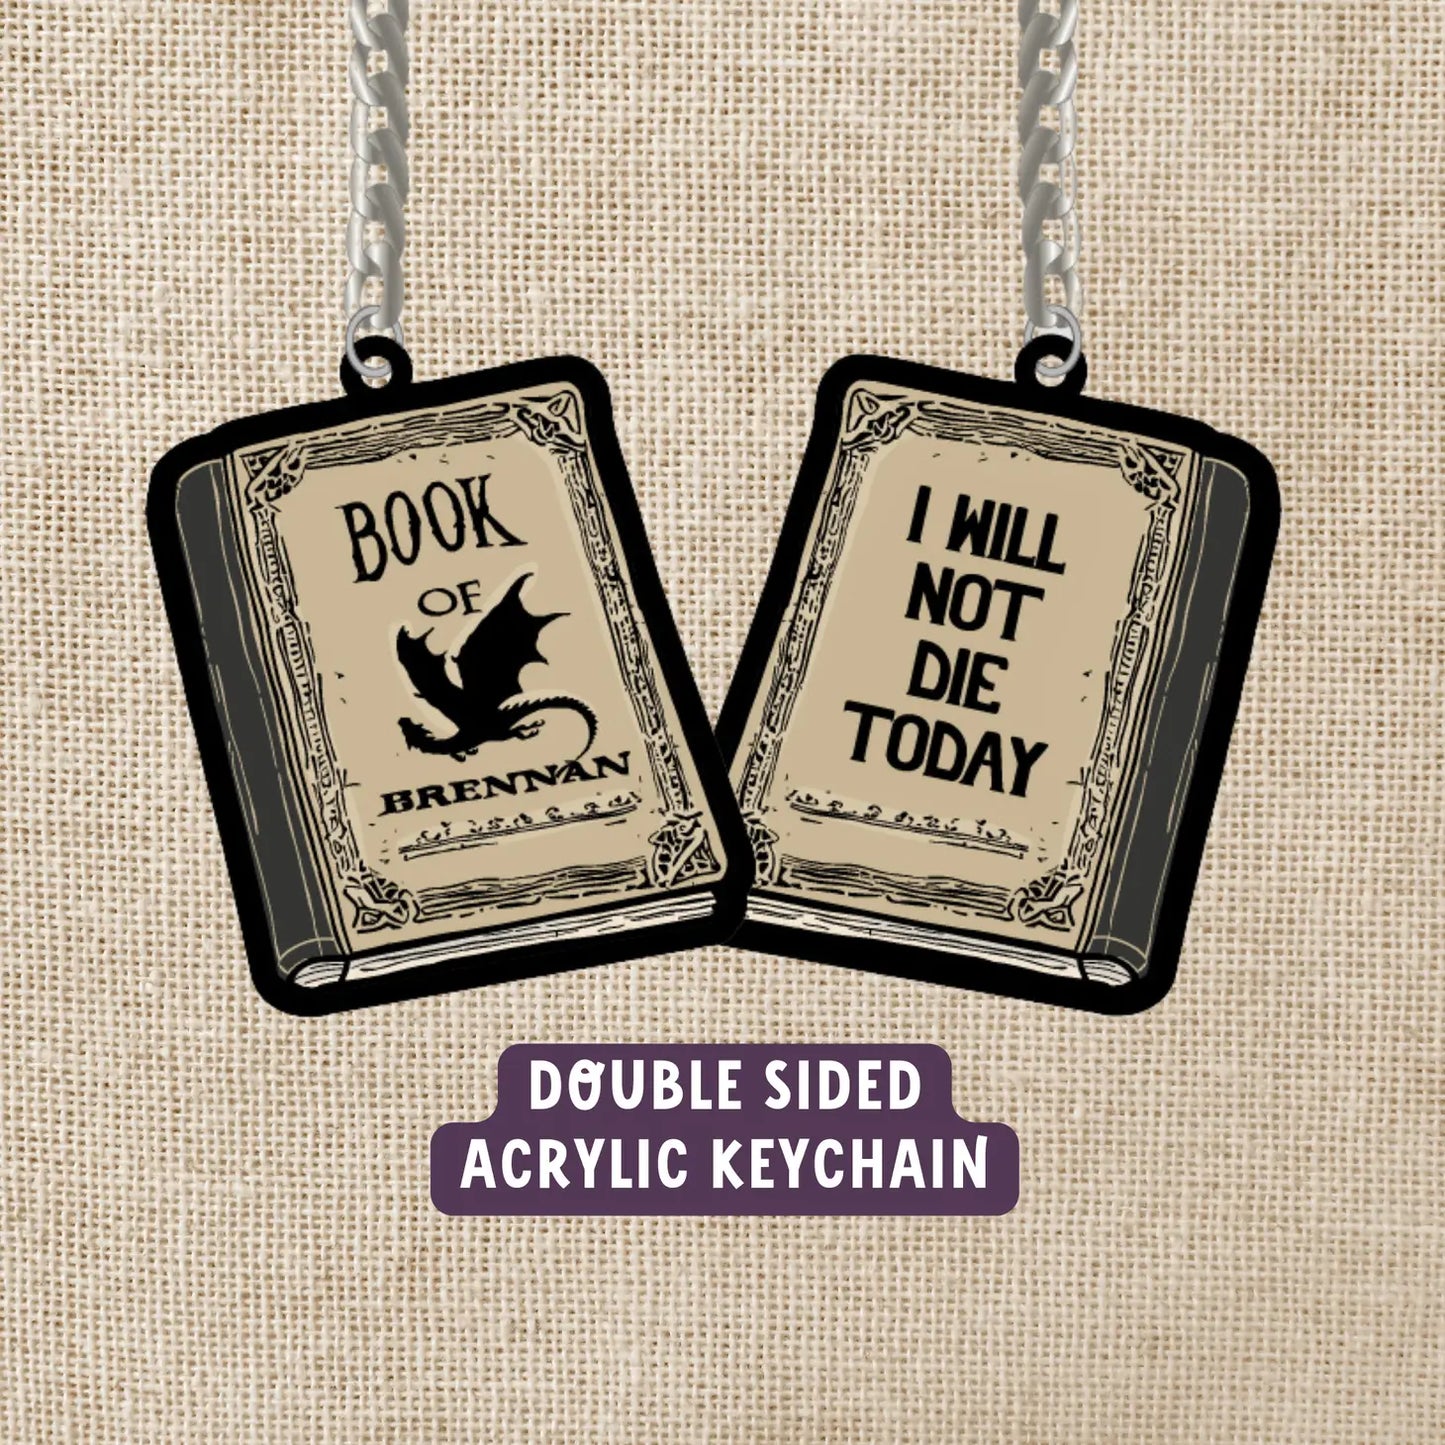 Book of Brennan Double Sided Acrylic Keychain | Fourth Wing